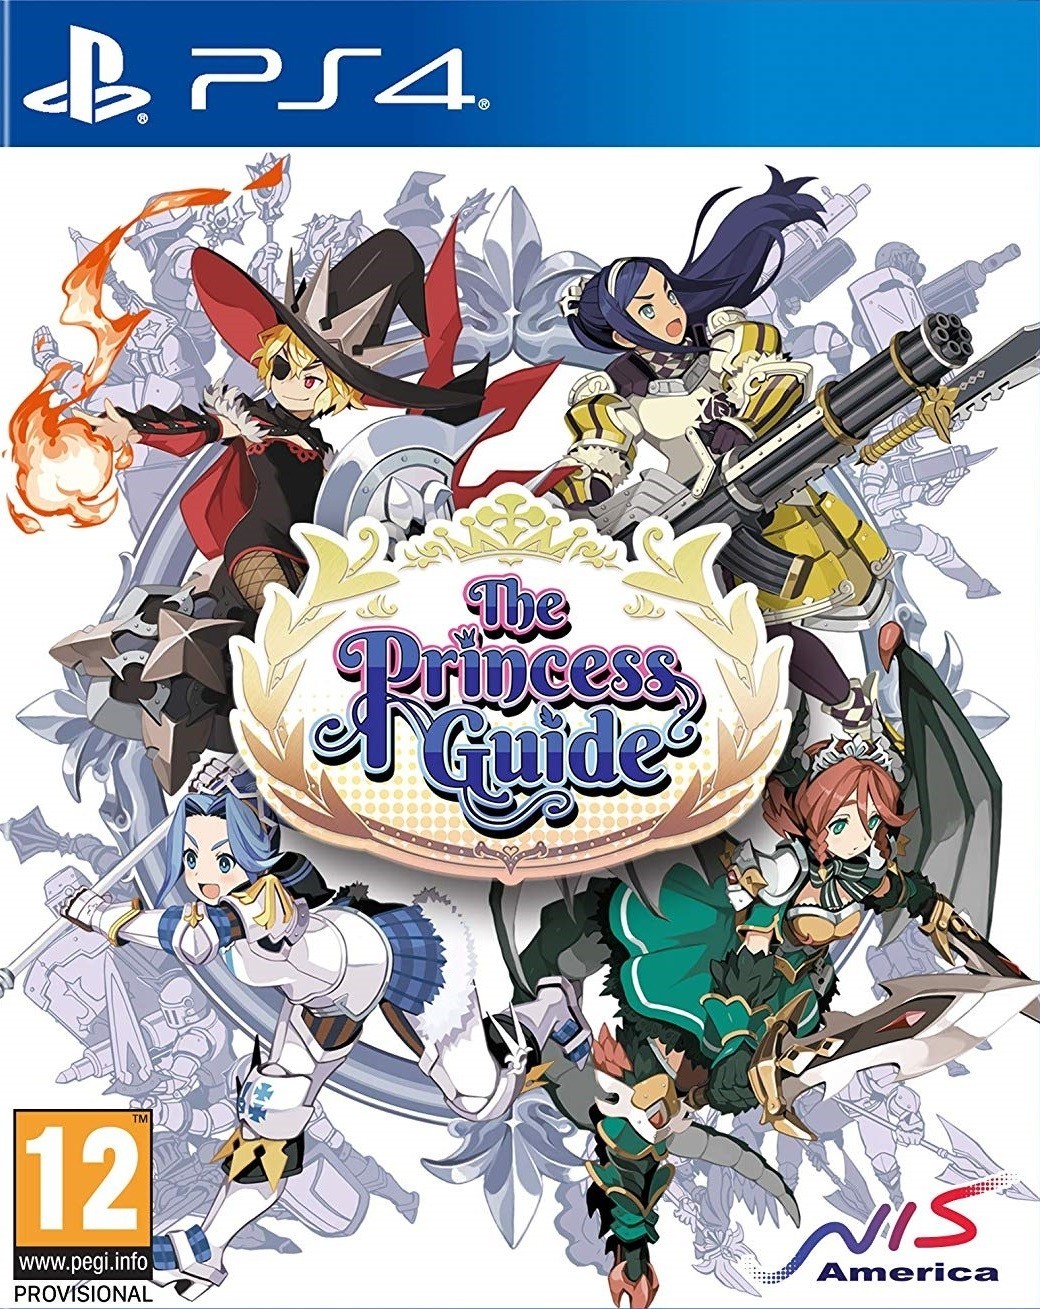 The Princess Guide (PS4), Nippon Ichi Software